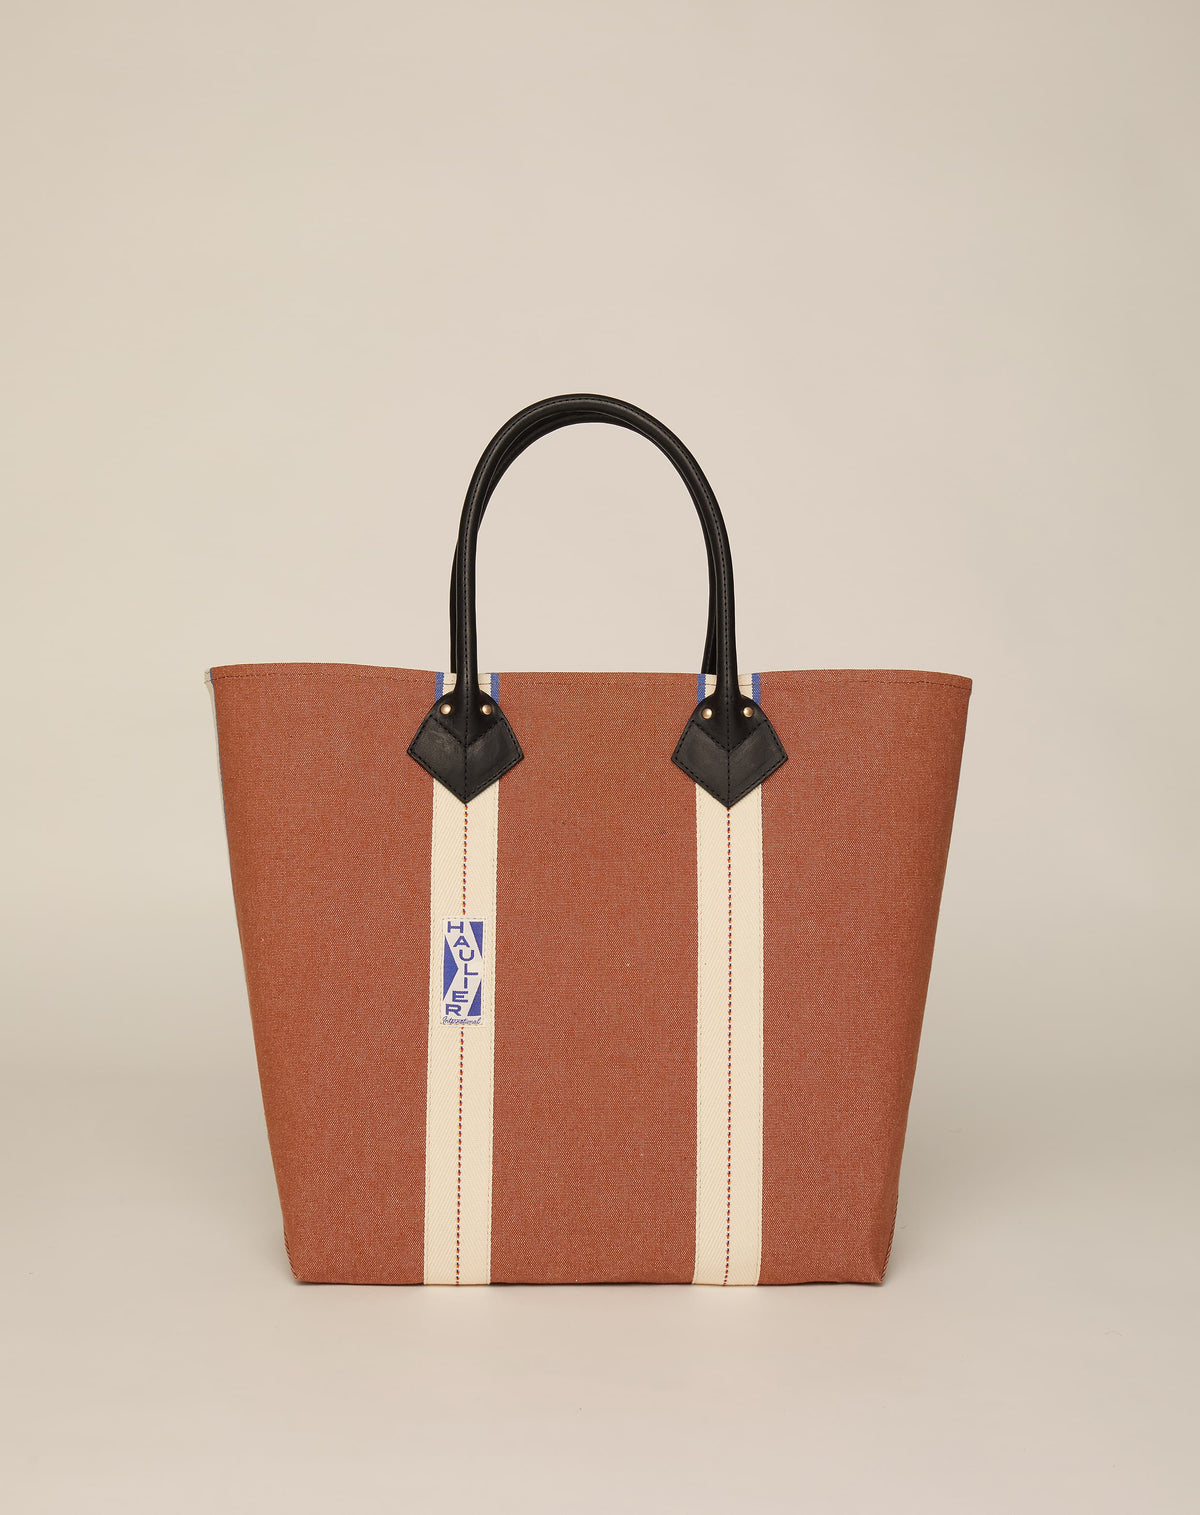 Image of medium-sized classic canvas tote bag in tan colour with black leather handles and contrasting stripes.